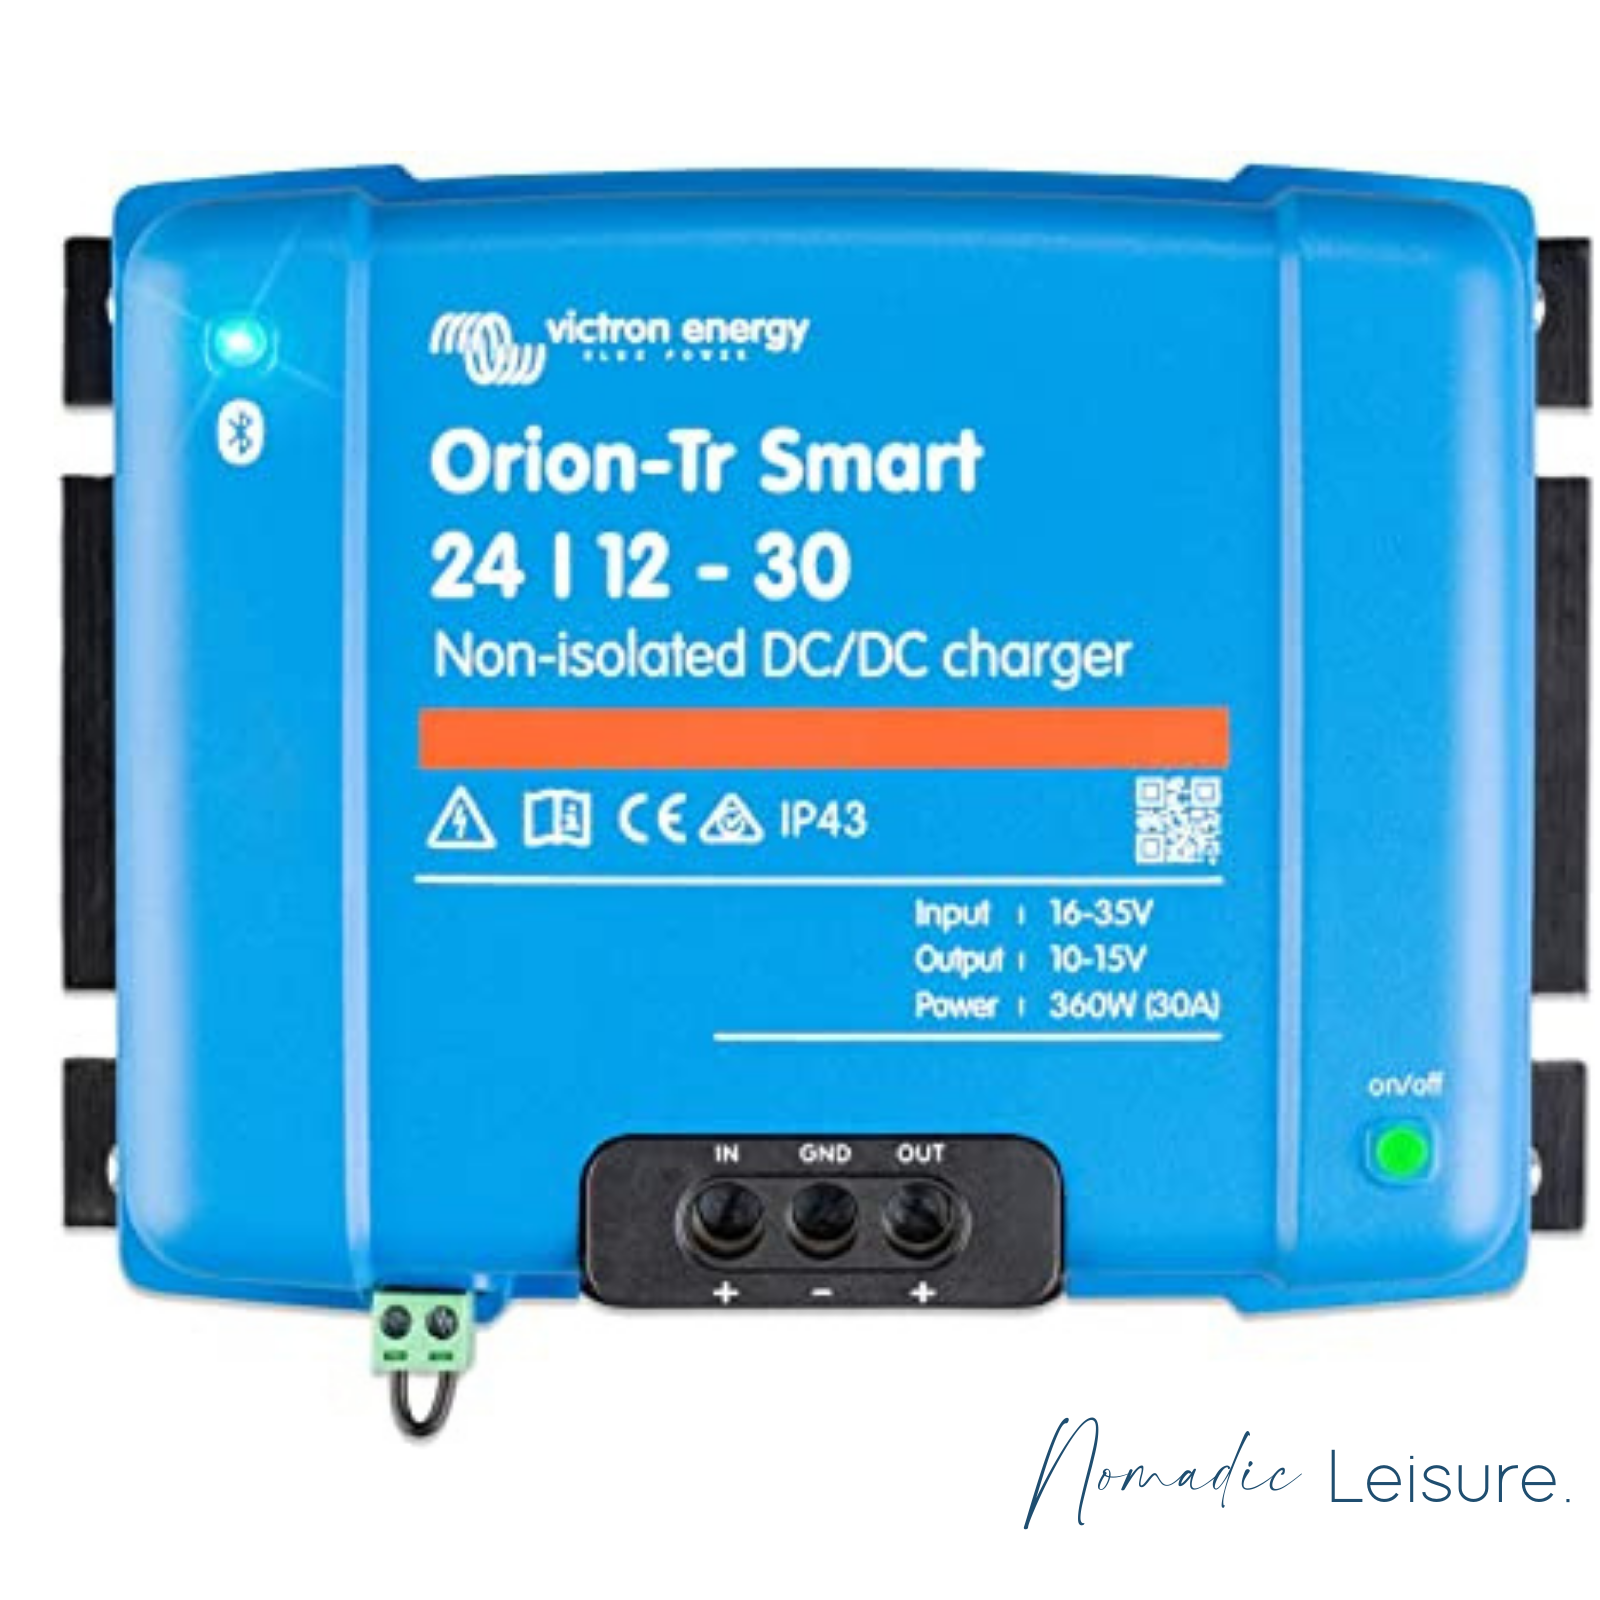 Victron Orion-Tr Smart 24/12-30A (360W) Non-isolated DC-DC charger – Nomadic Leisure